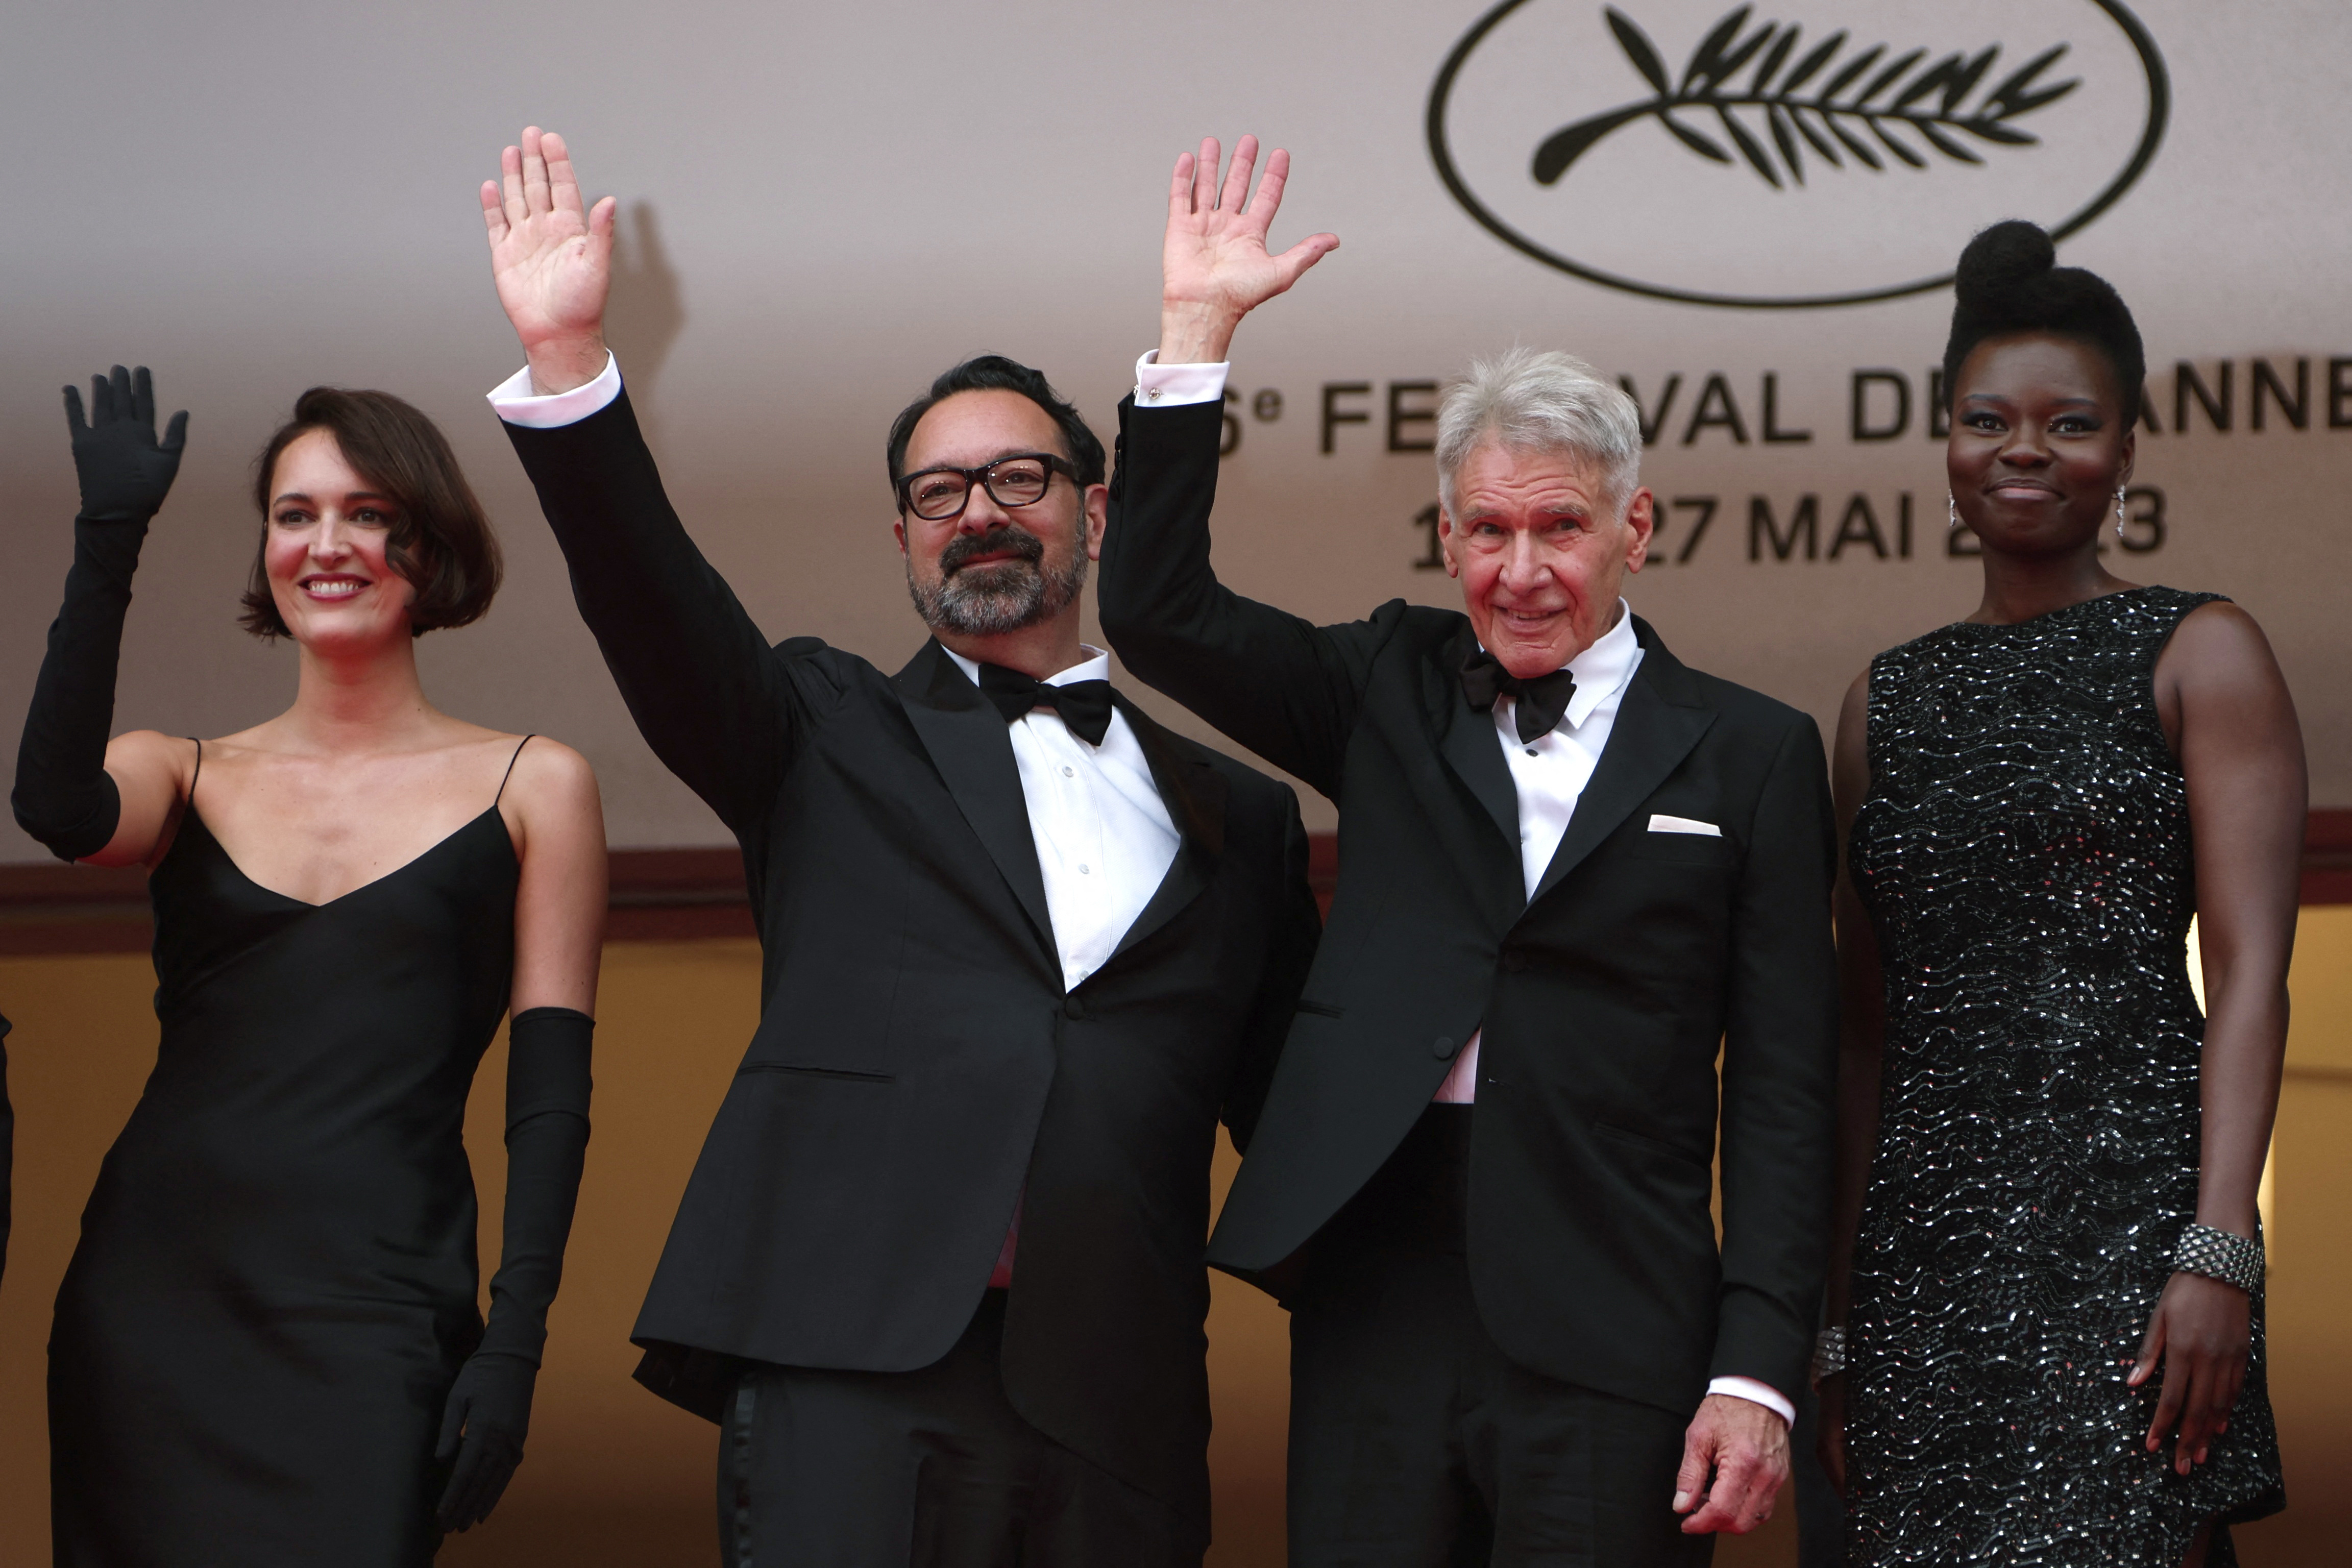 Indiana Jones 5 to Premiere at Cannes 2023